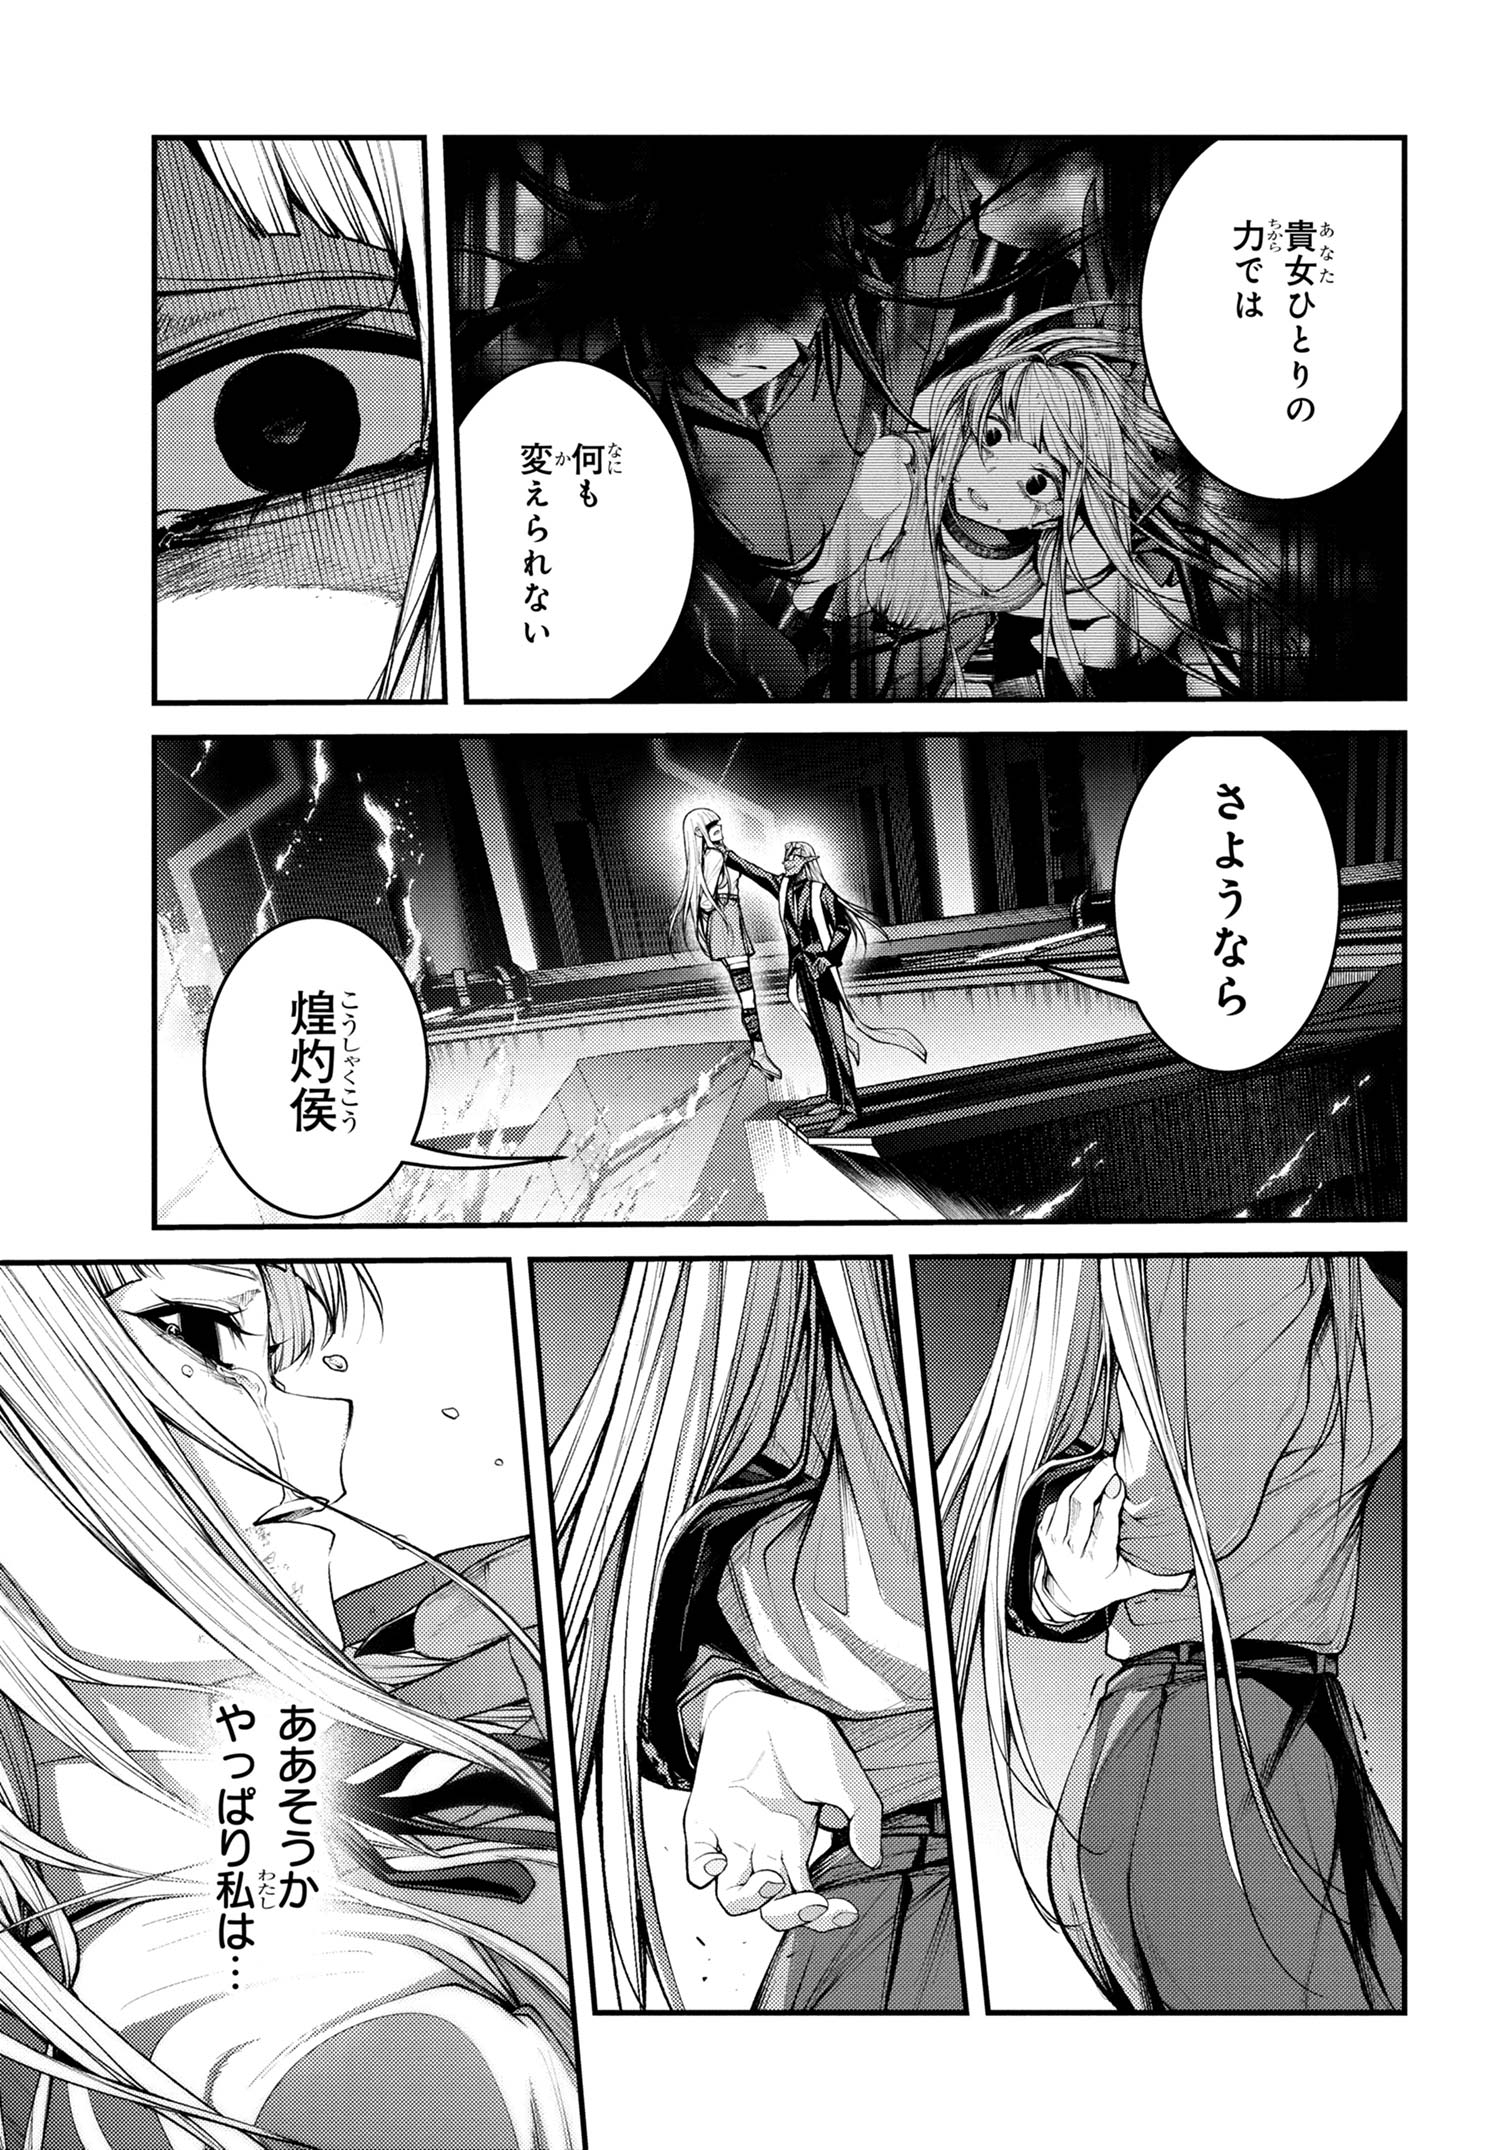 Maou 2099 - Chapter 10.2 - Page 1